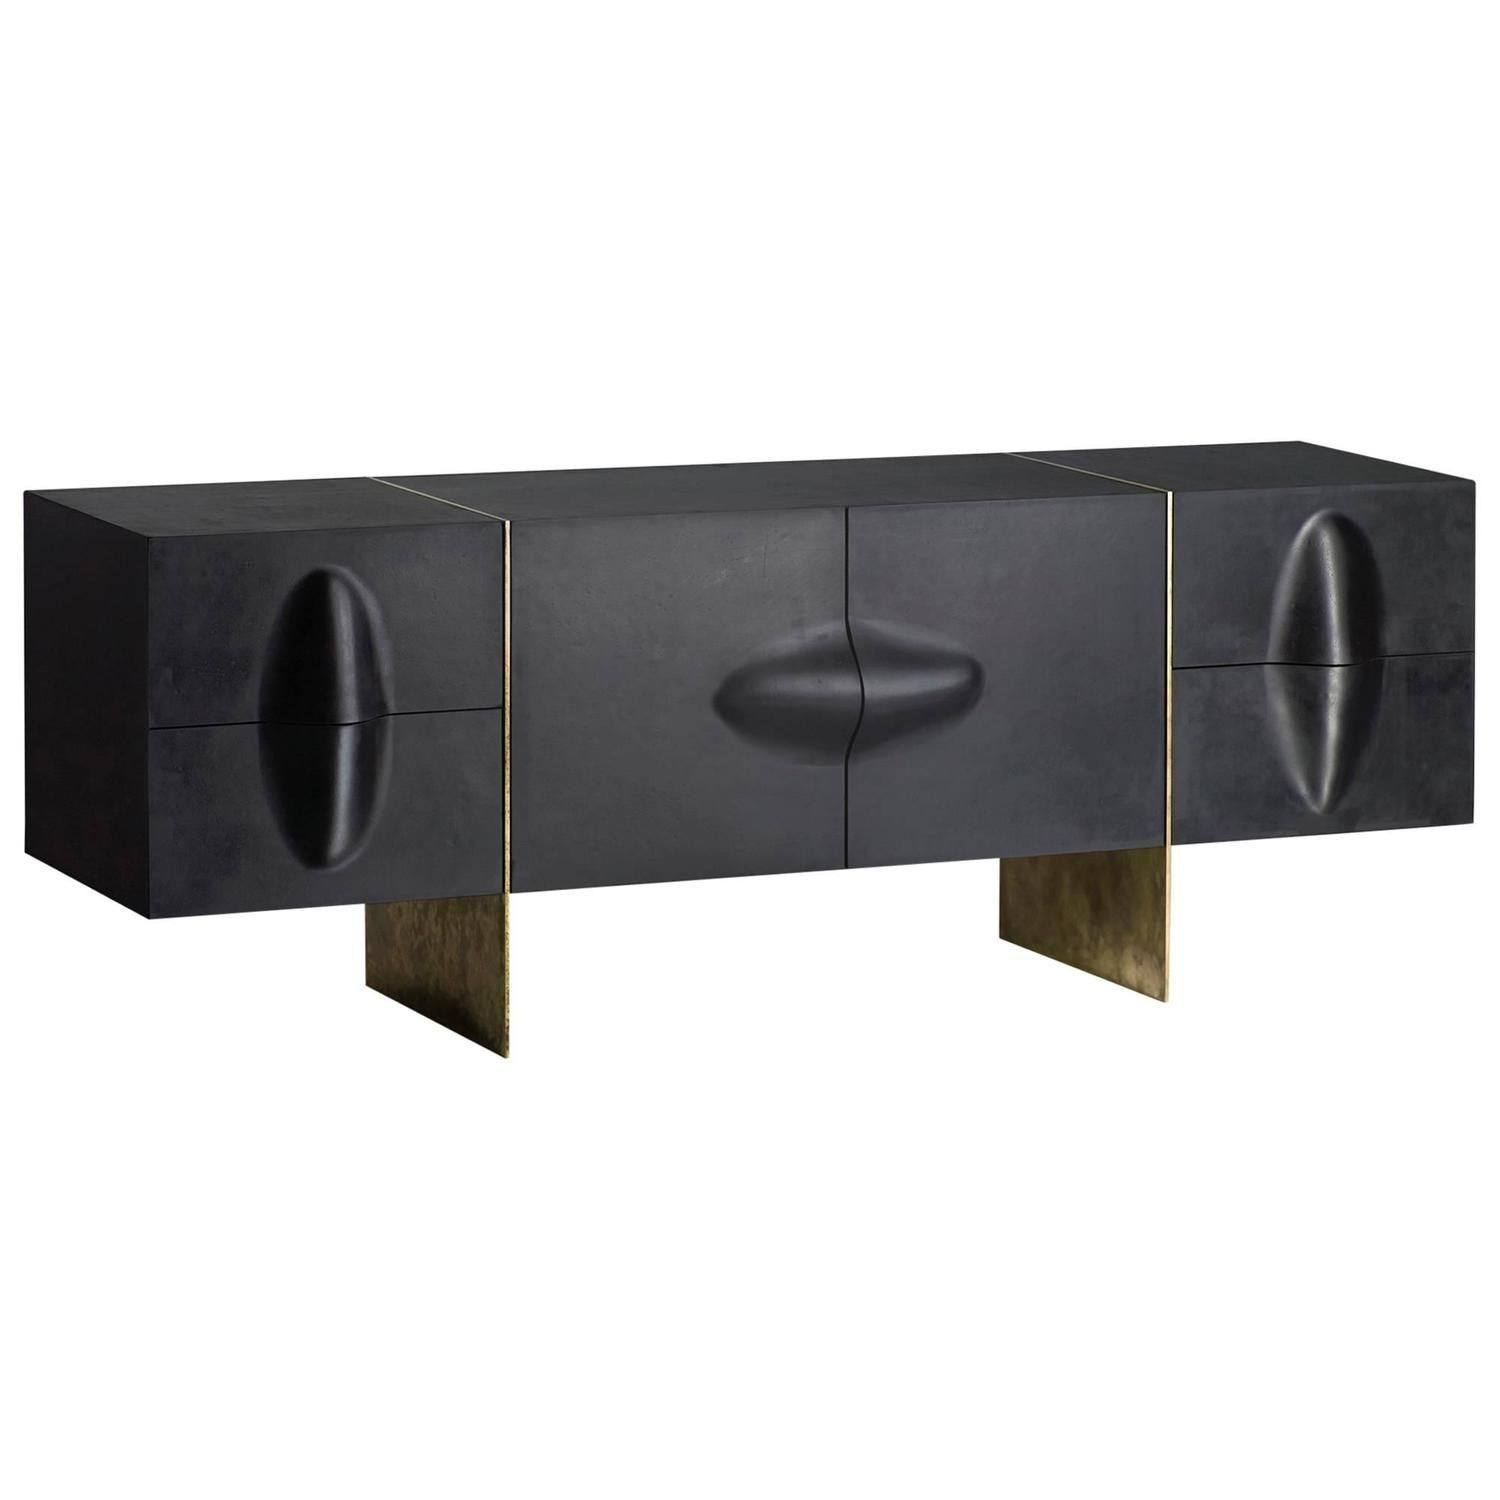 Brian Thoreen Rubber Credenza / Sideboard | Miscellaneous (all Intended For Parrish Sideboards (View 17 of 30)